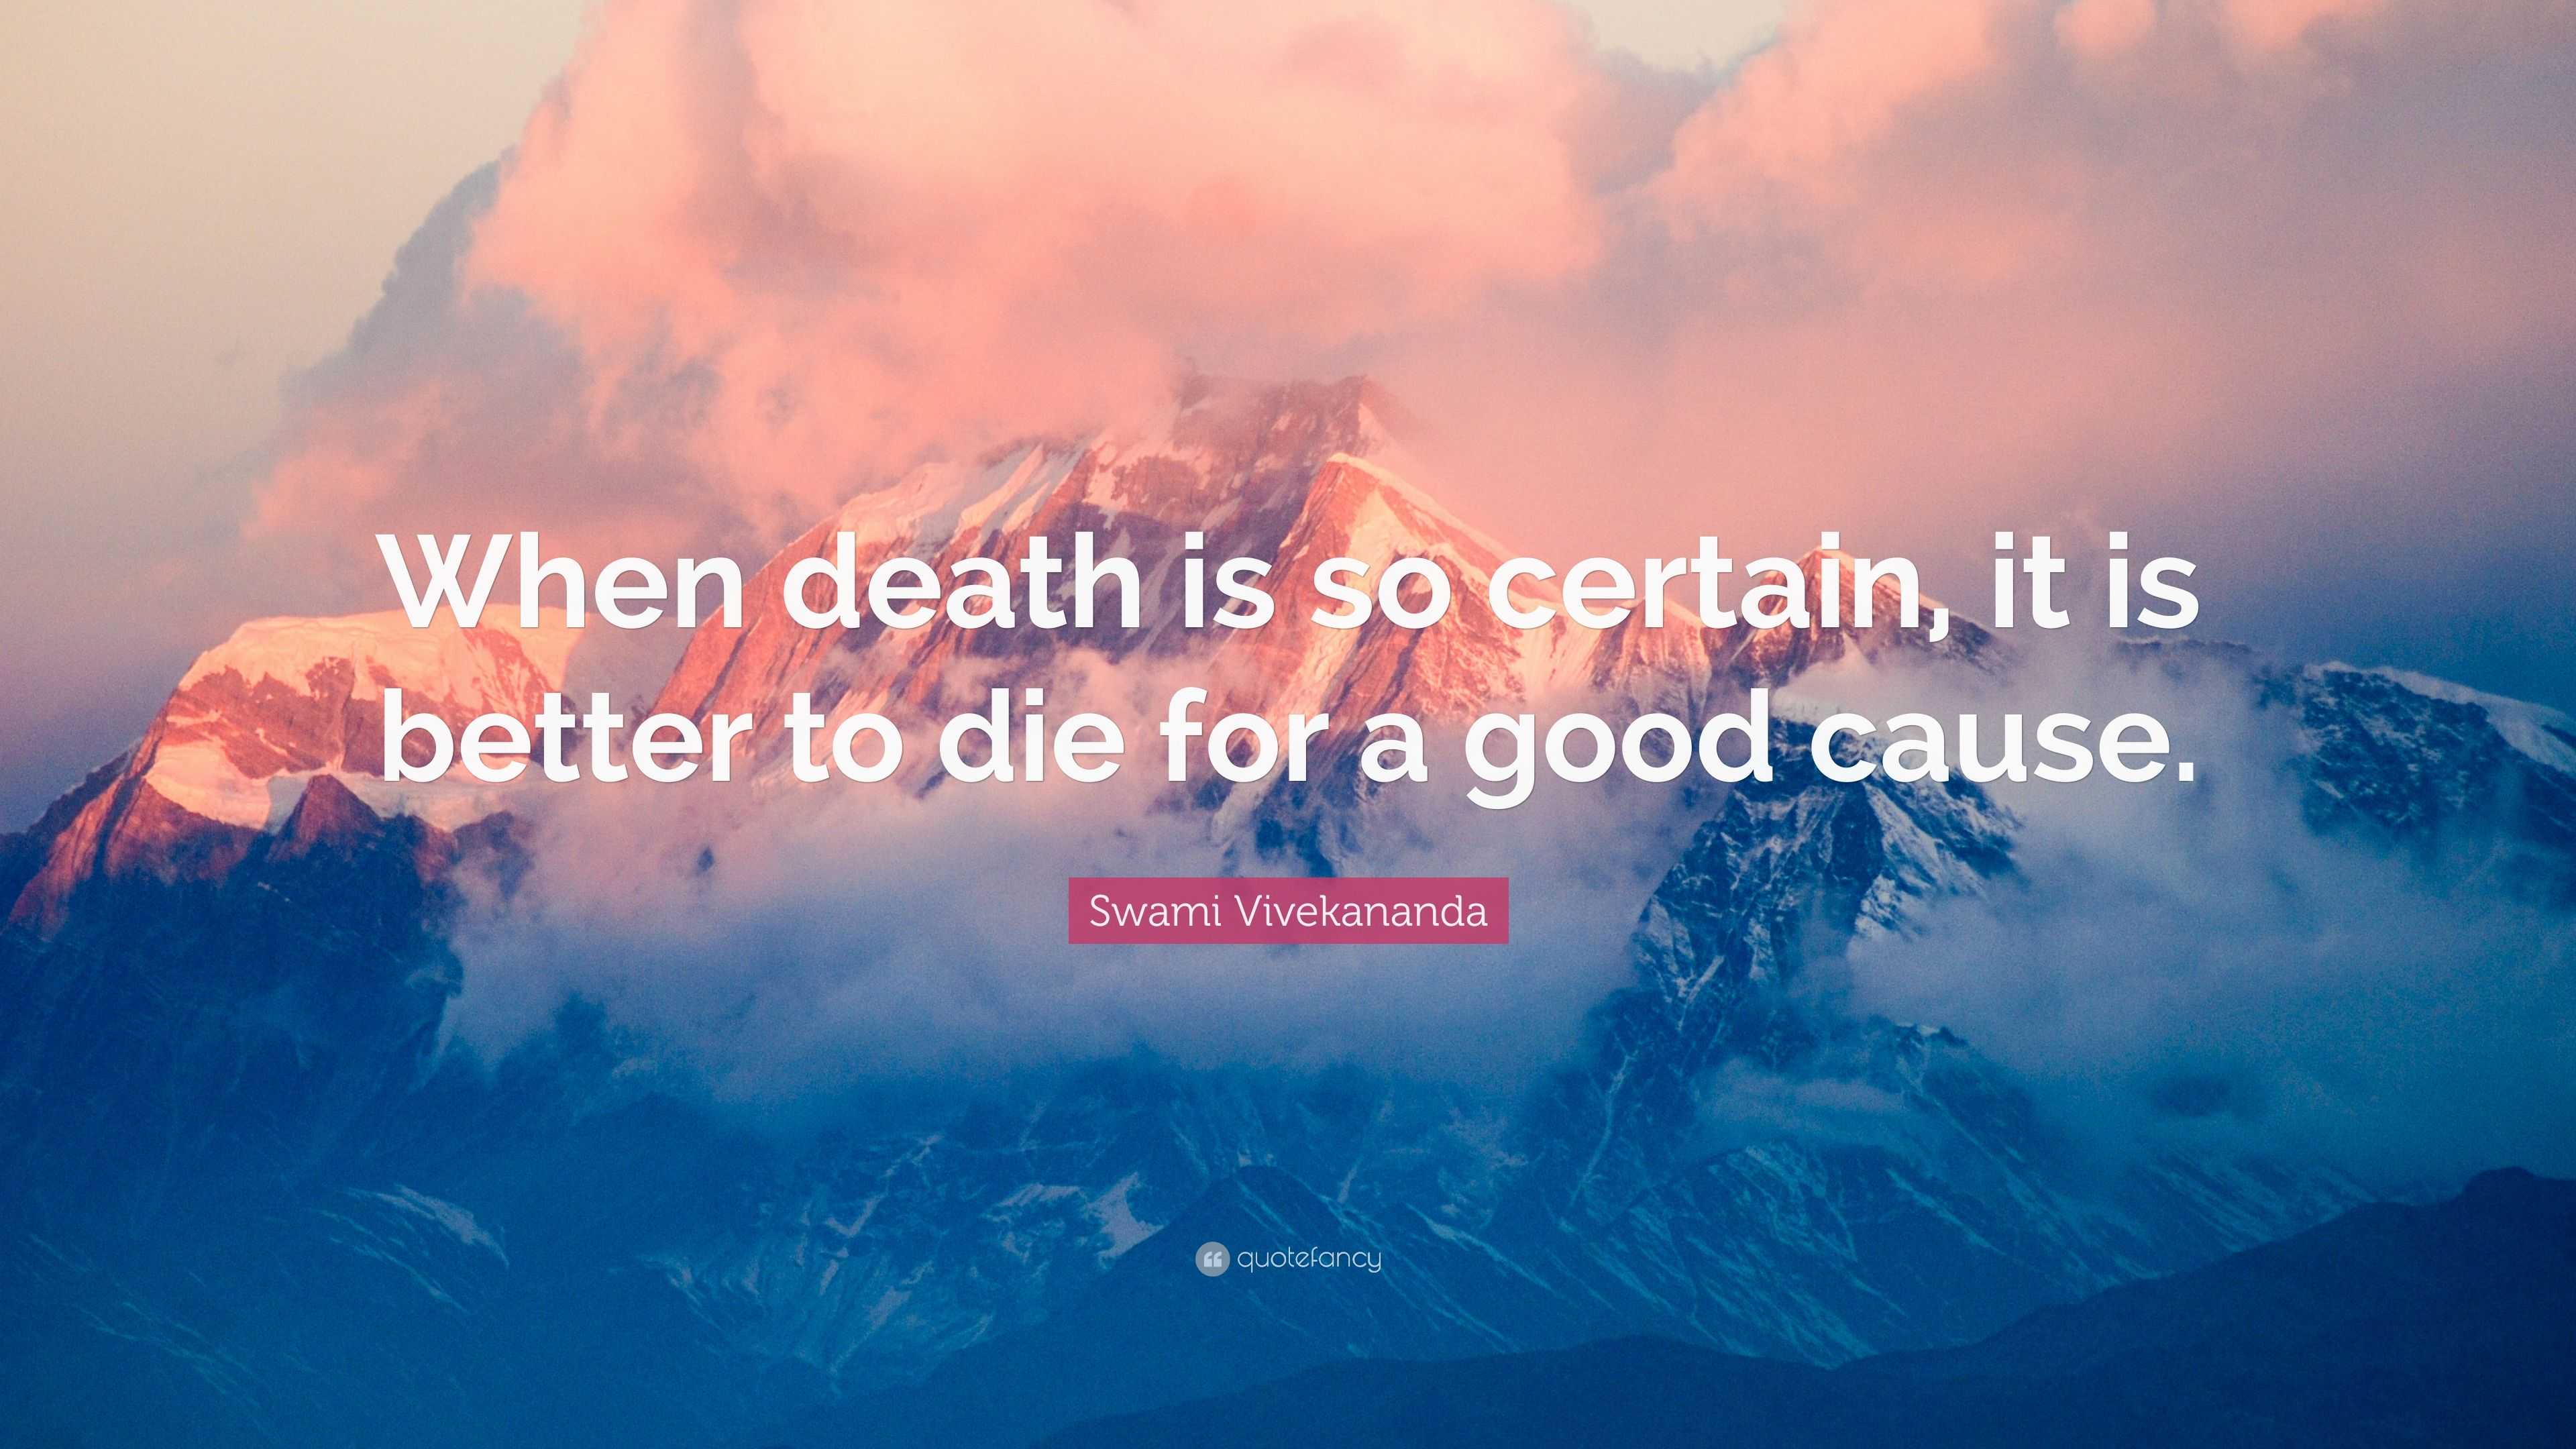 Swami Vivekananda Quote: “When death is so certain, it is better to die ...